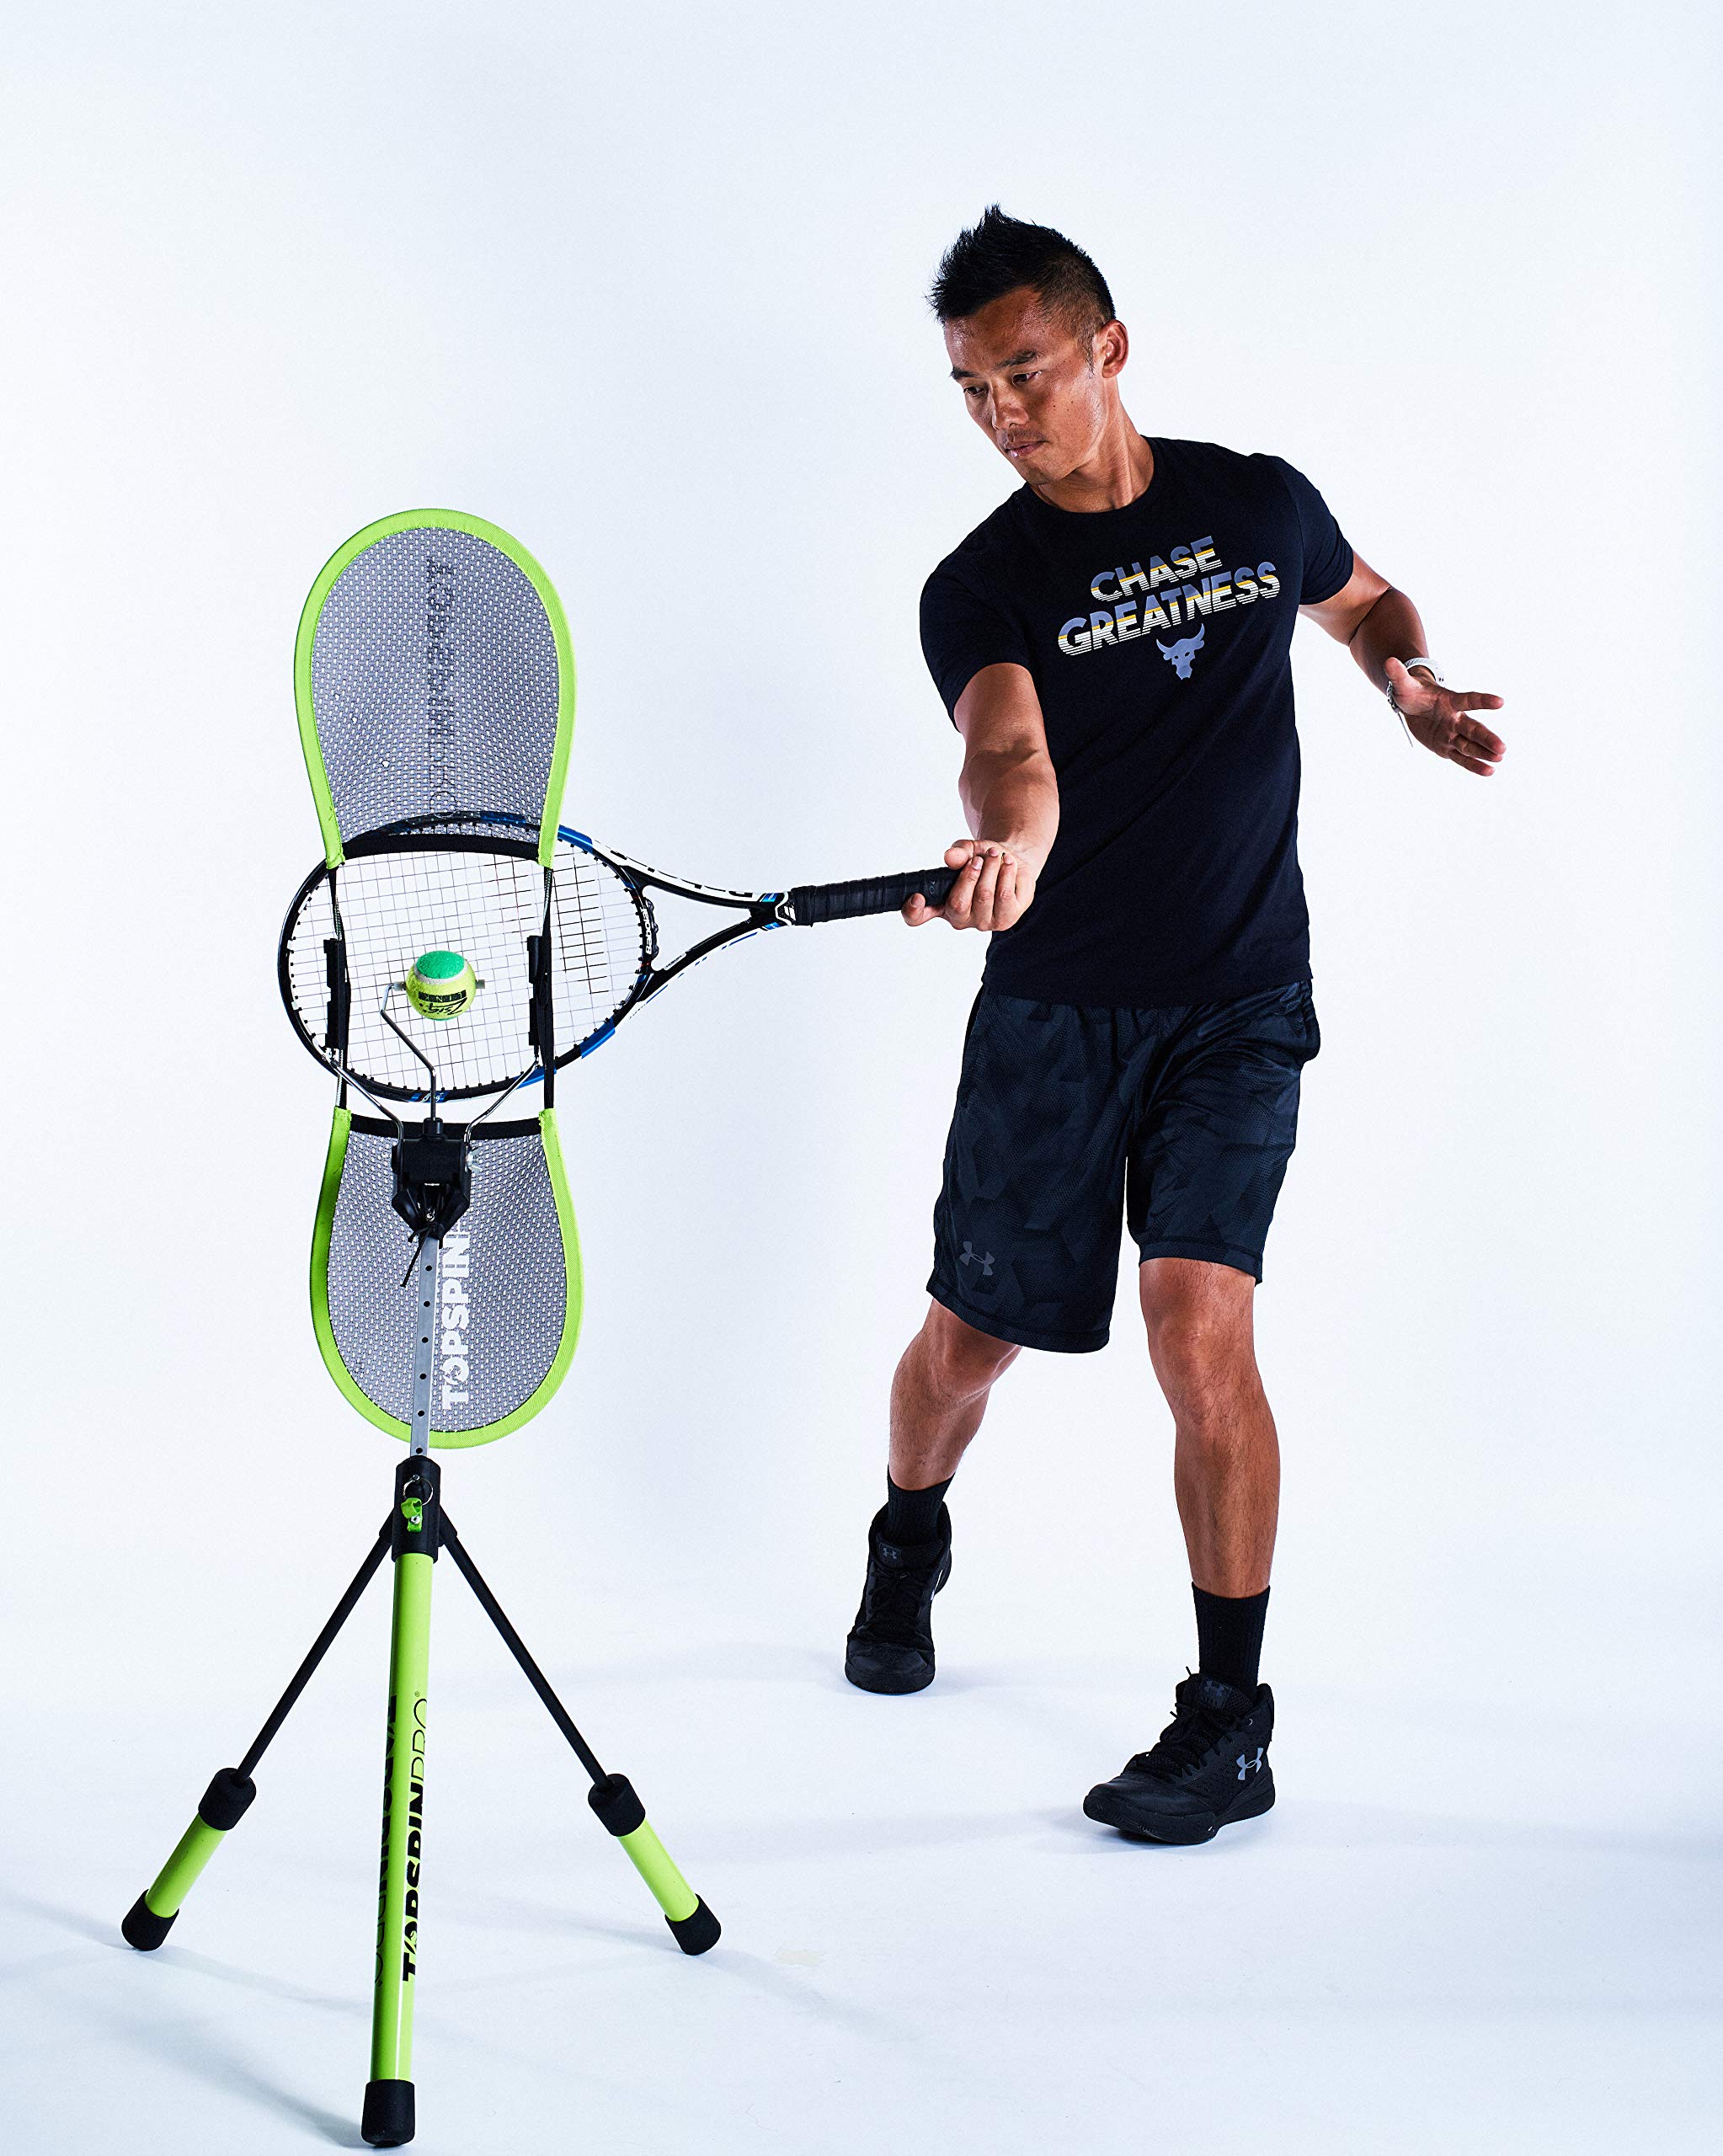 TopspinPro - Tennis Training Aid, Learn Topspin in 2 Minutes a Day